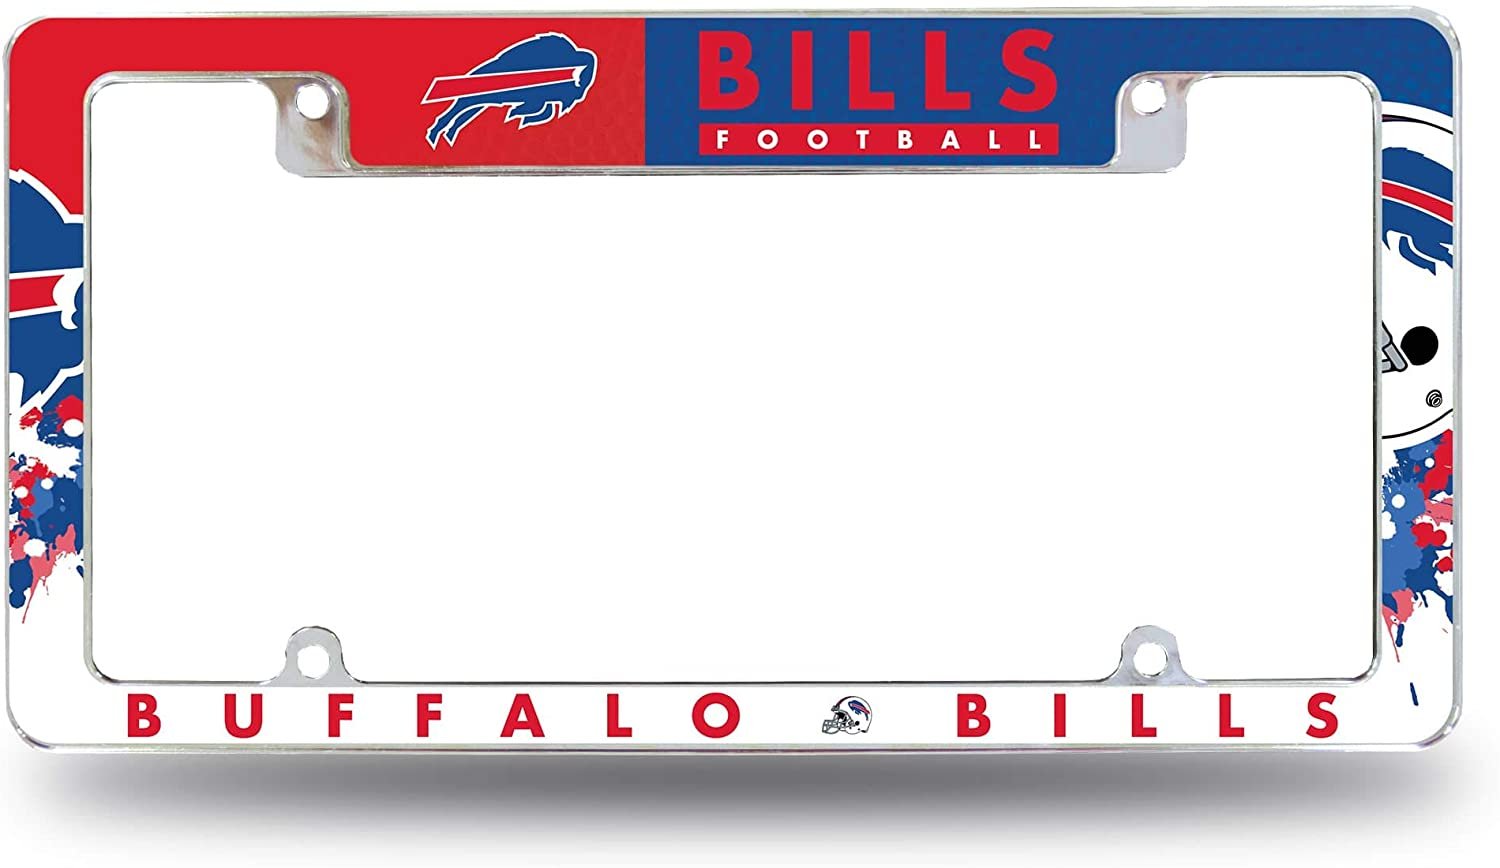 Buffalo Bills Metal License License Plate Frame Tag Cover, All Over Design, 12x6 Inch